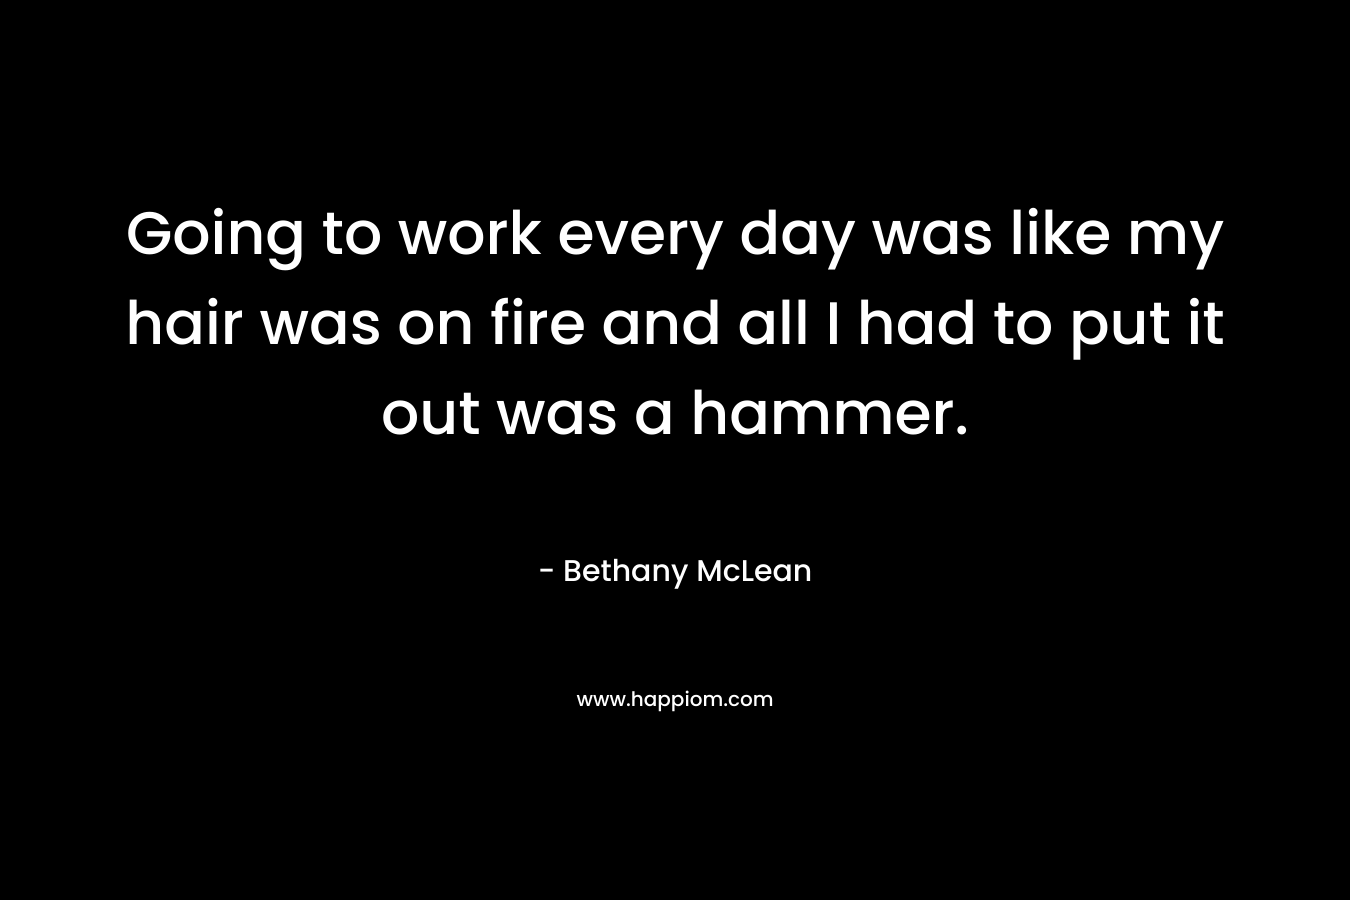 Going to work every day was like my hair was on fire and all I had to put it out was a hammer. – Bethany McLean